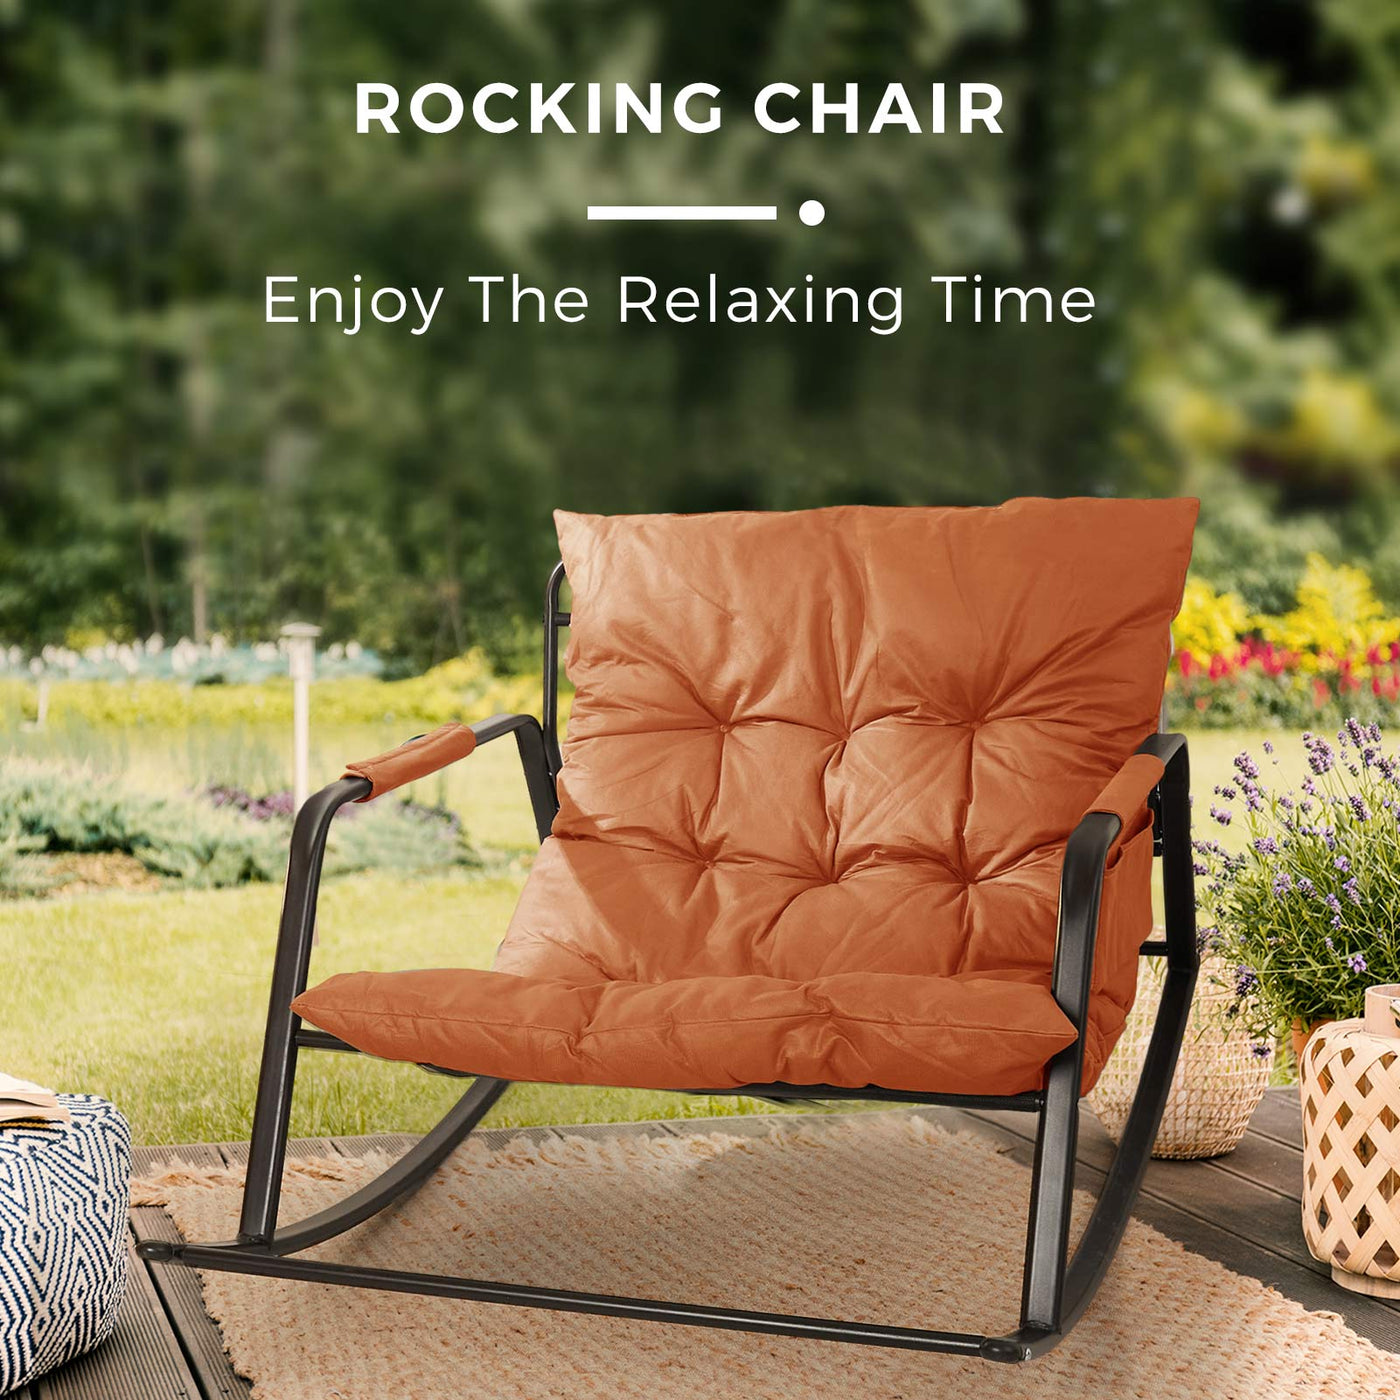 MAXYOYO Grand Patio Indoor & Outdoor Adult Rocking Chair with Padded Cushion for Living Room and Graden, Orange